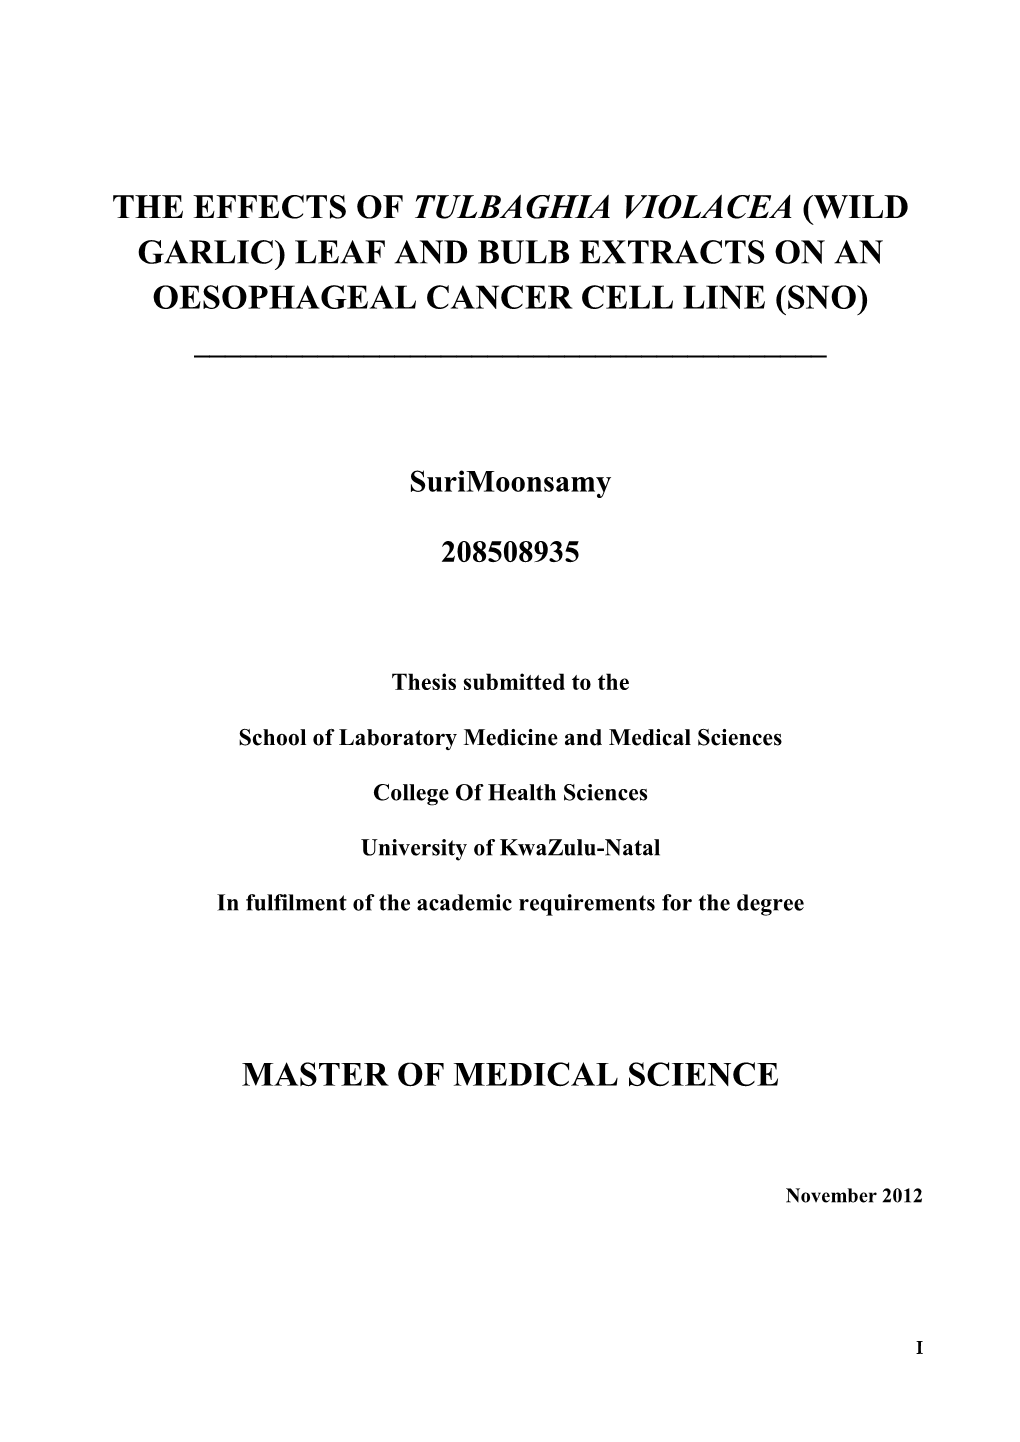 The Effects of Tulbaghia Violacea (Wild Garlic) Leaf and Bulb Extracts on an Oesophageal Cancer Cell Line (Sno) ______